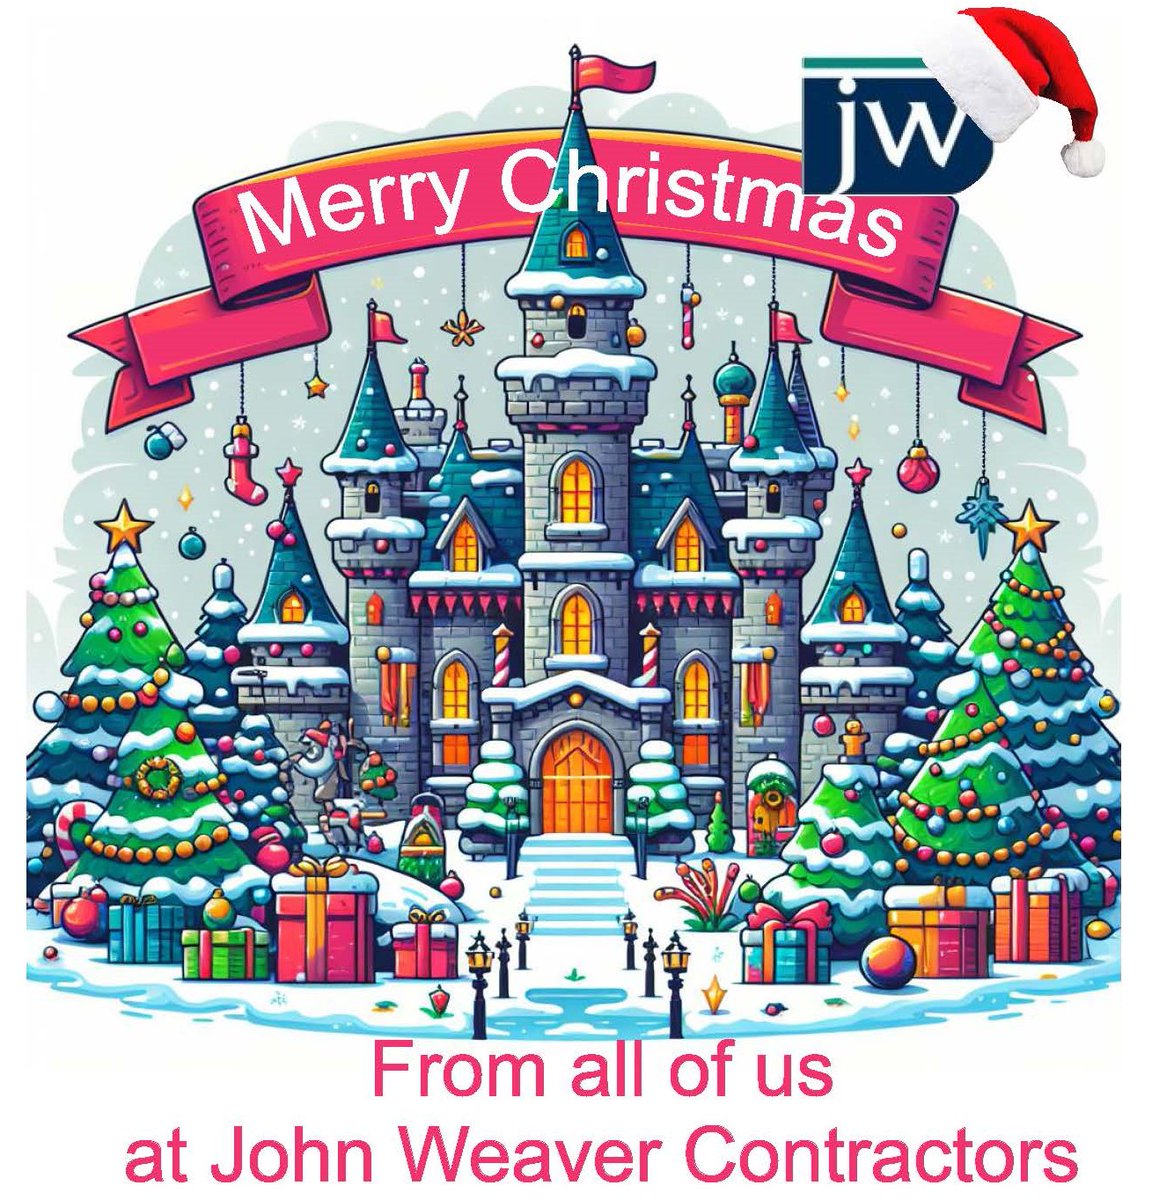 Wishing you all a very Merry Christmas and a happy and healthy New Year, from all of the team at John Weaver Contractors. 🎄